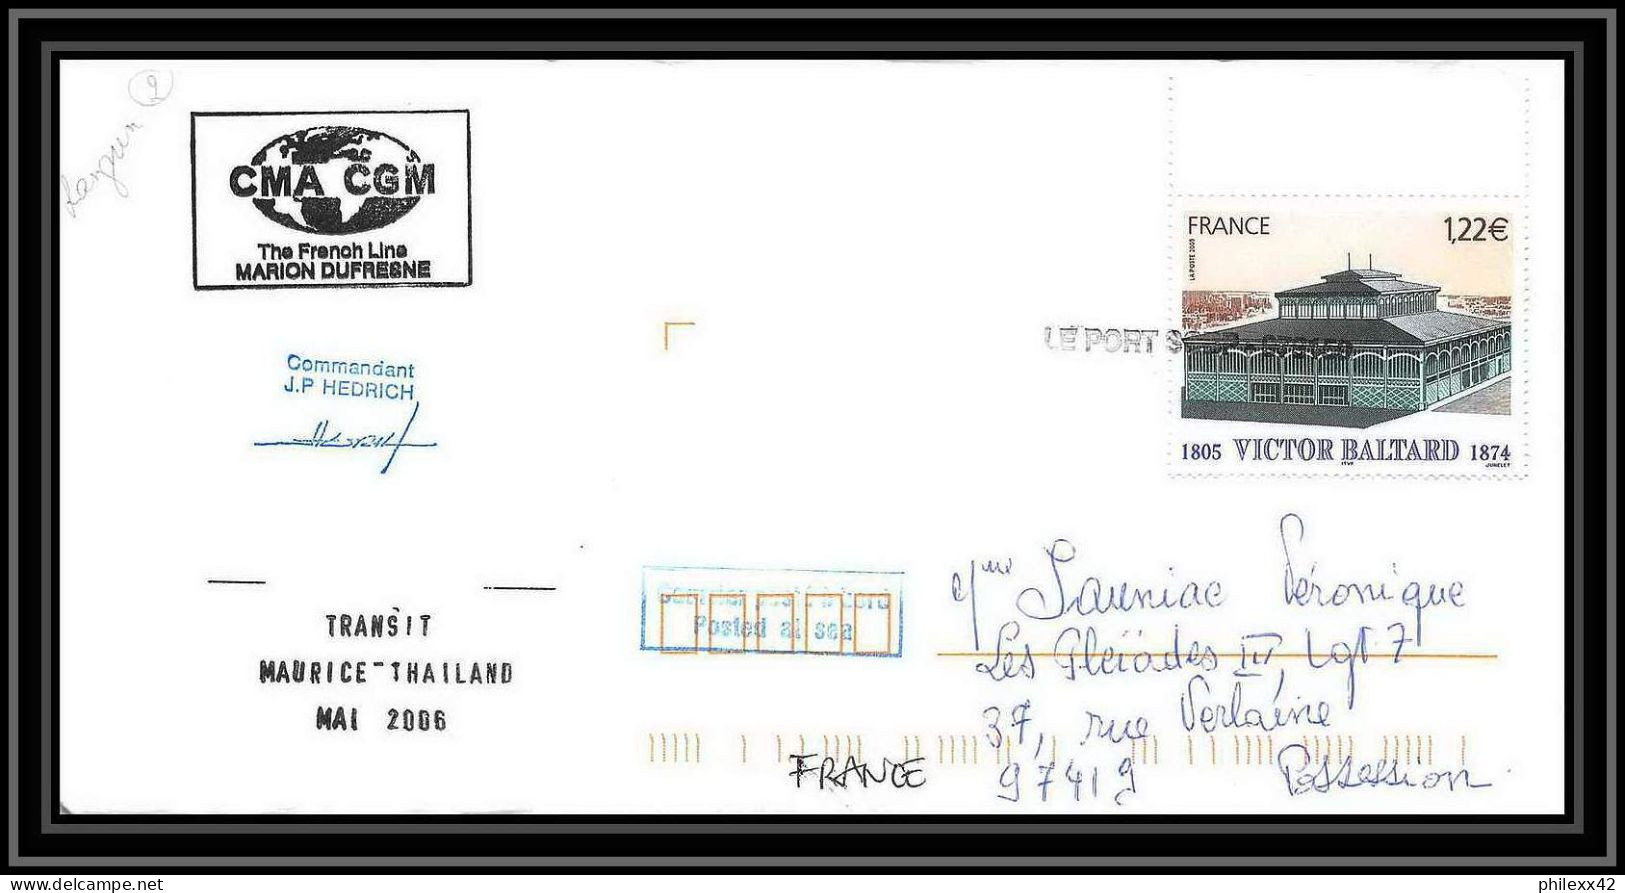 2583 ANTARCTIC Rangun -Lettre Cover Dufresne 2 Signé Signed Transit Maurice Thailande 8/6/2006 Griffe - Covers & Documents